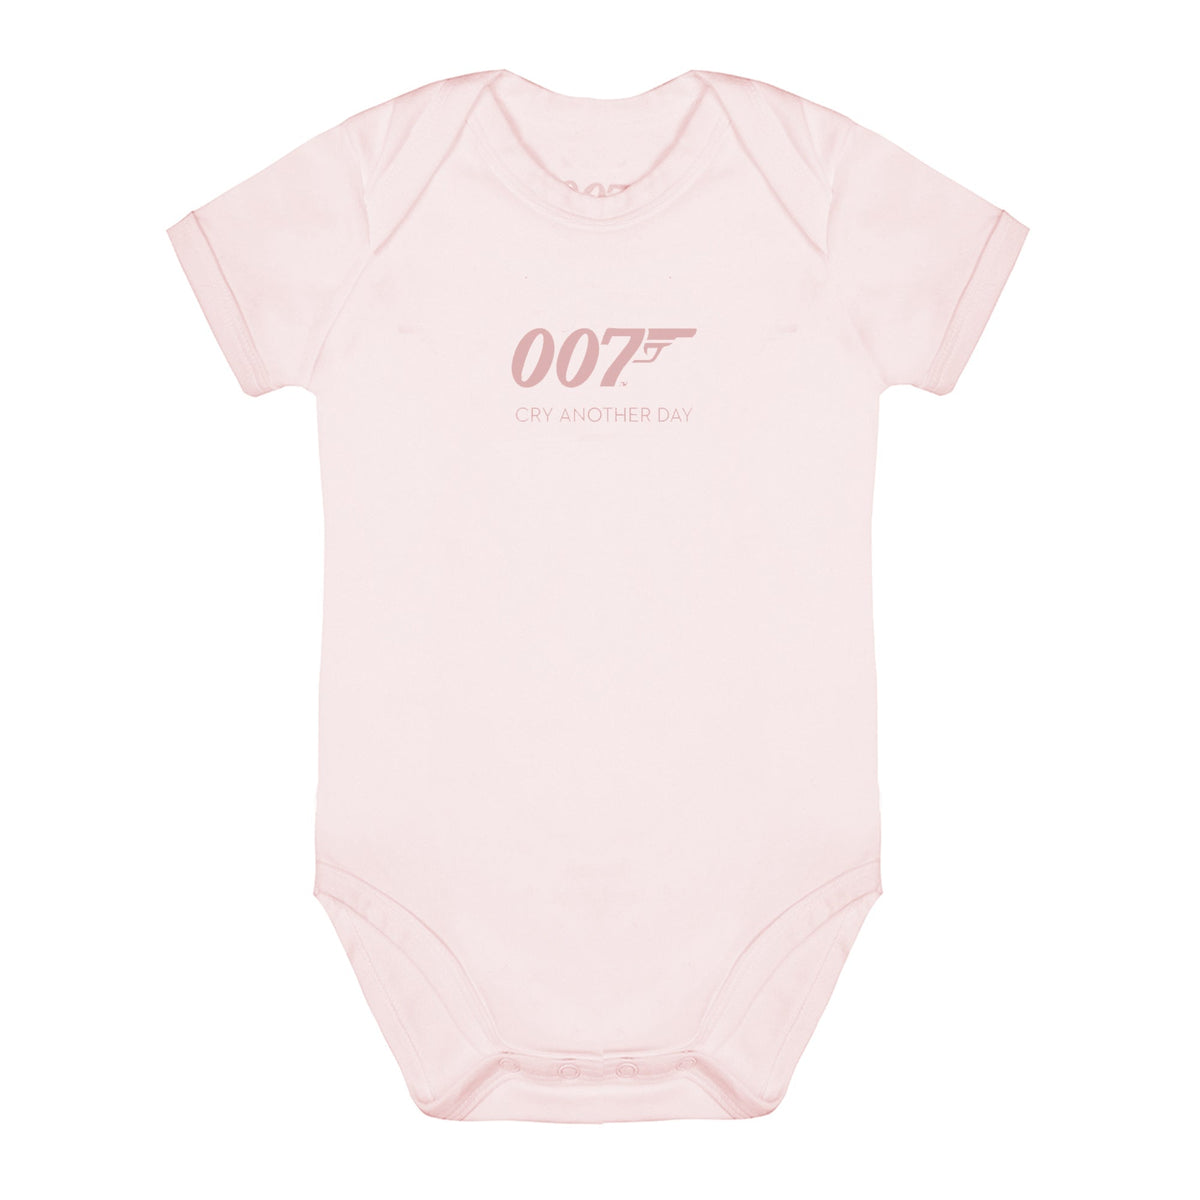 Cry Another Day 007 Pink Baby Bodysuit (Outlet Item) BABYSUIT EML 